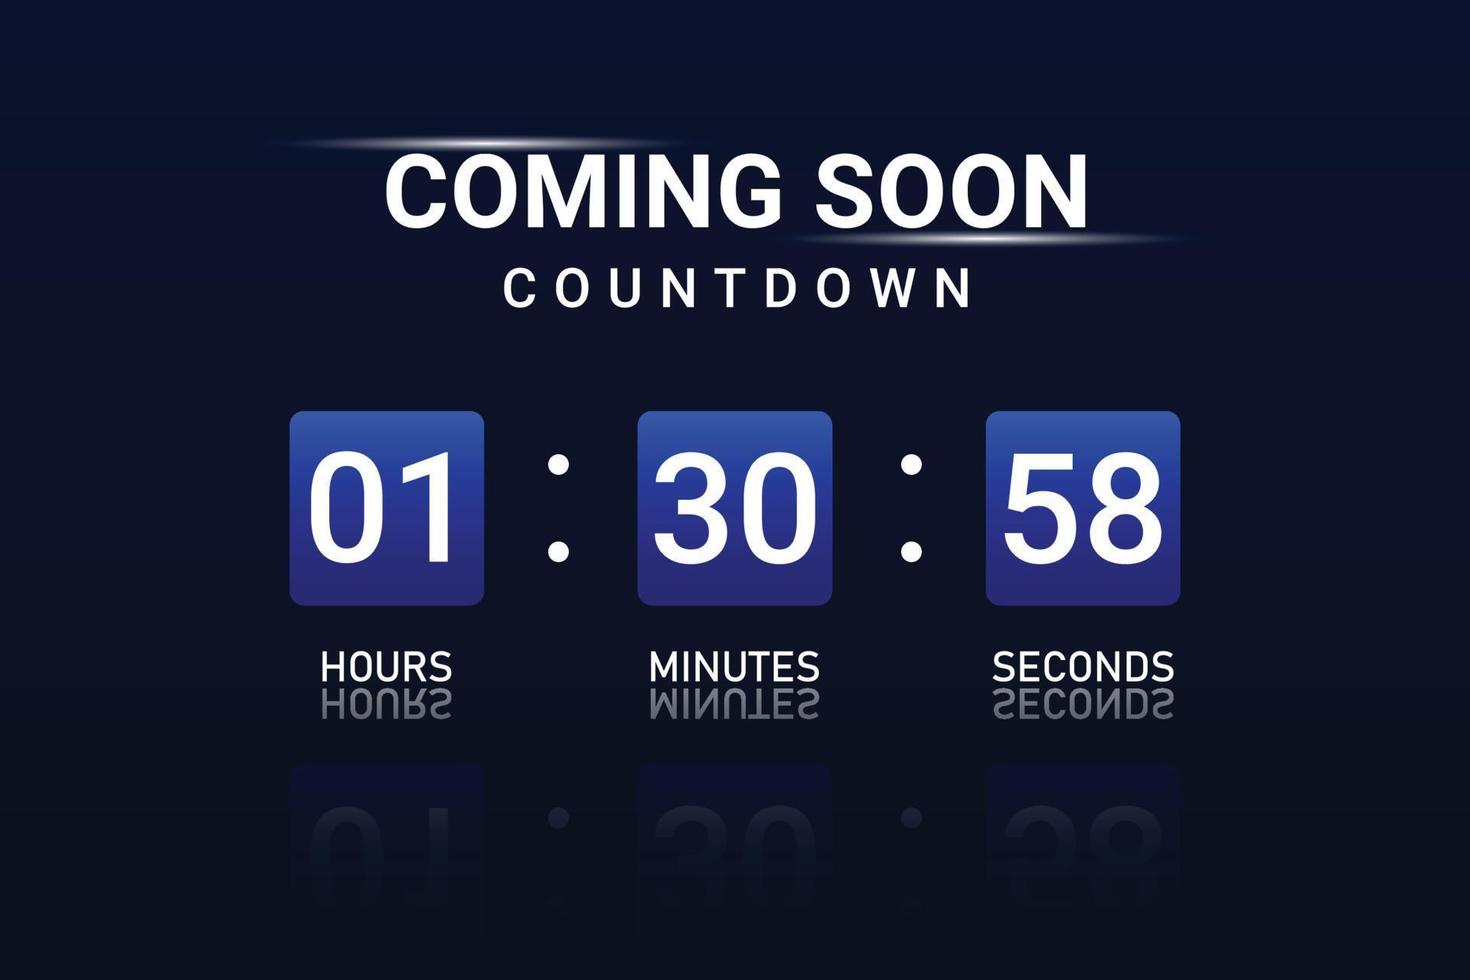 Coming Soon time Countdown banner design. vector